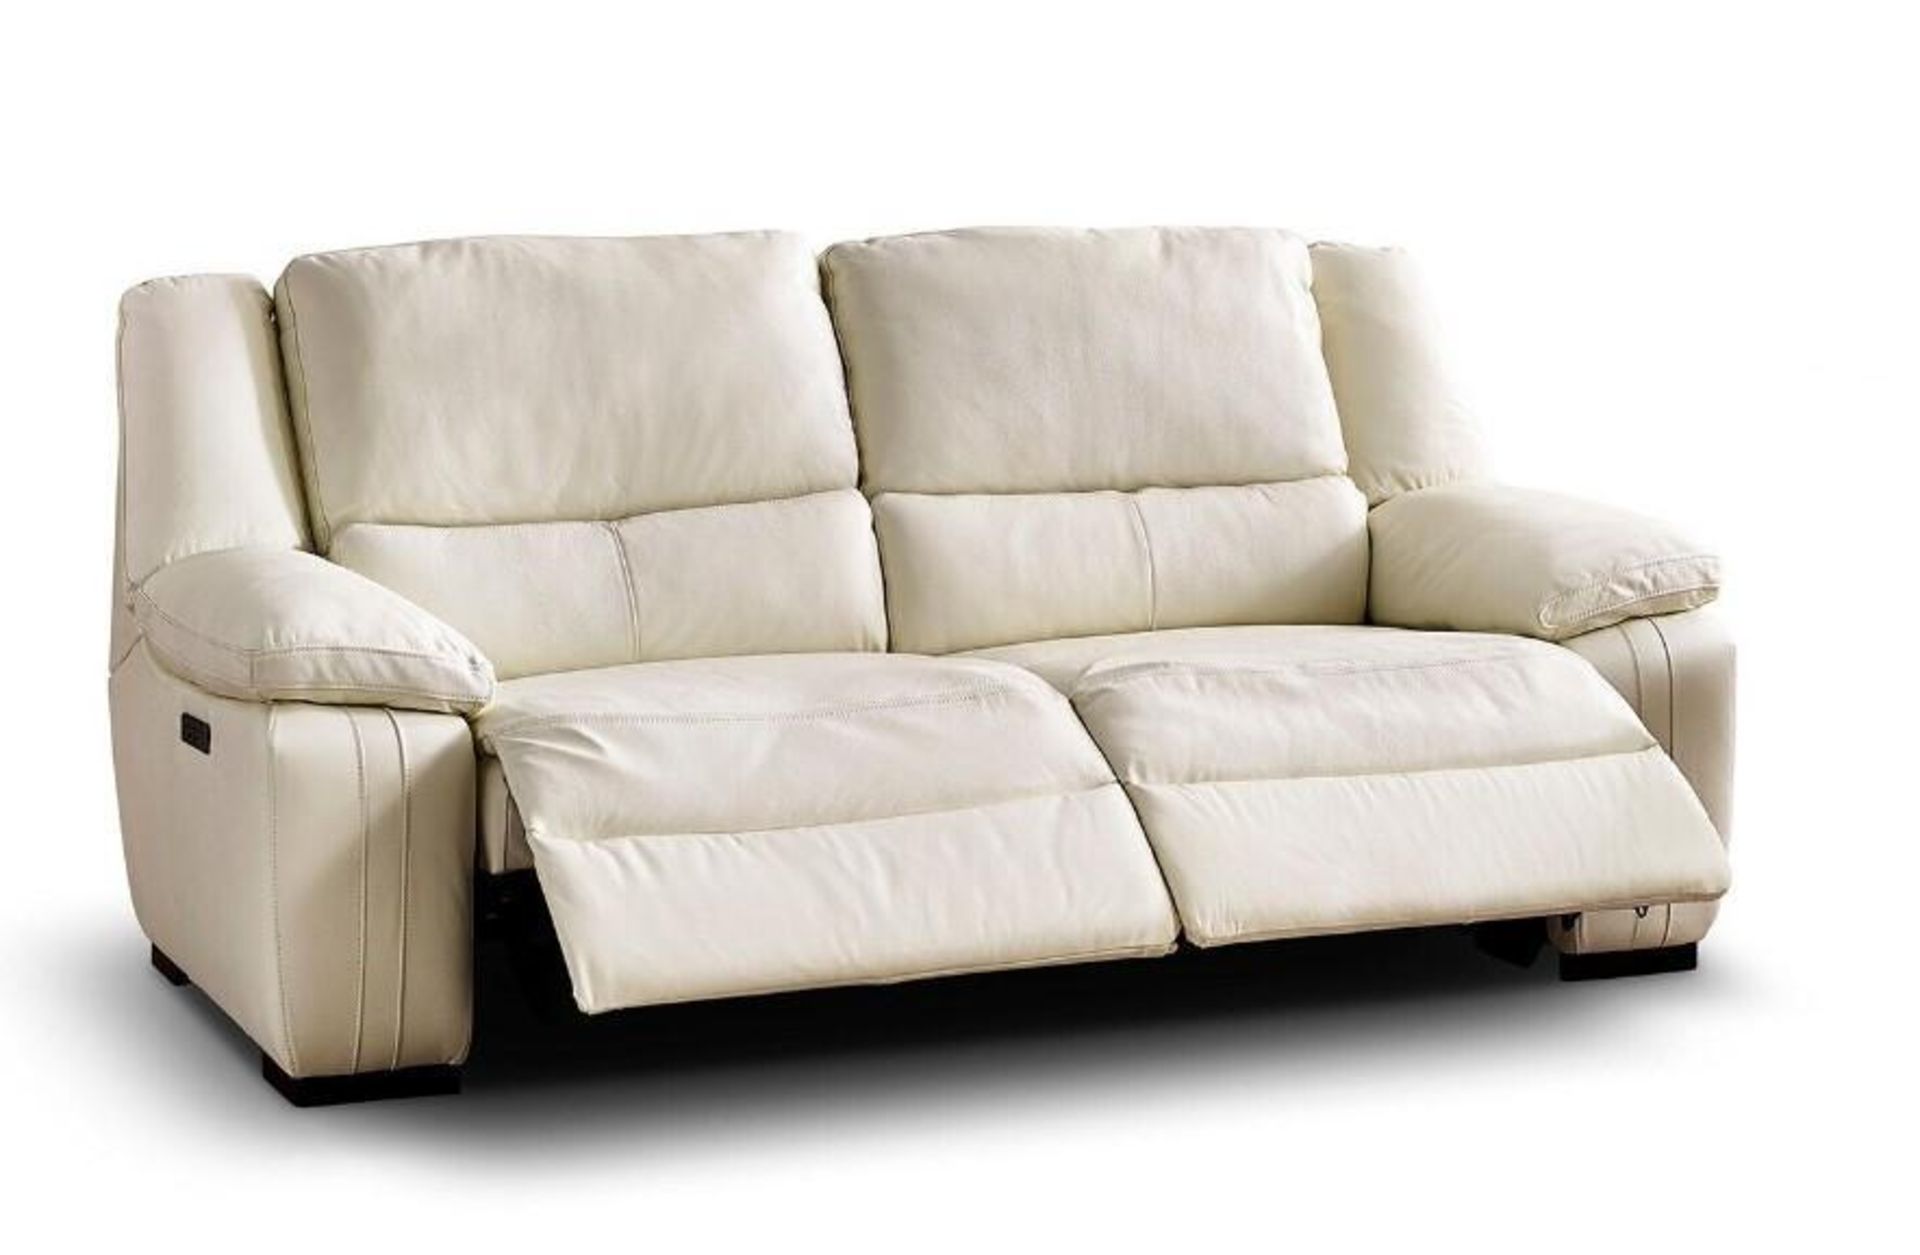 Brand new and boxed SCS Fallon 2 seater electric reclining sofa in Cream. - Image 7 of 7